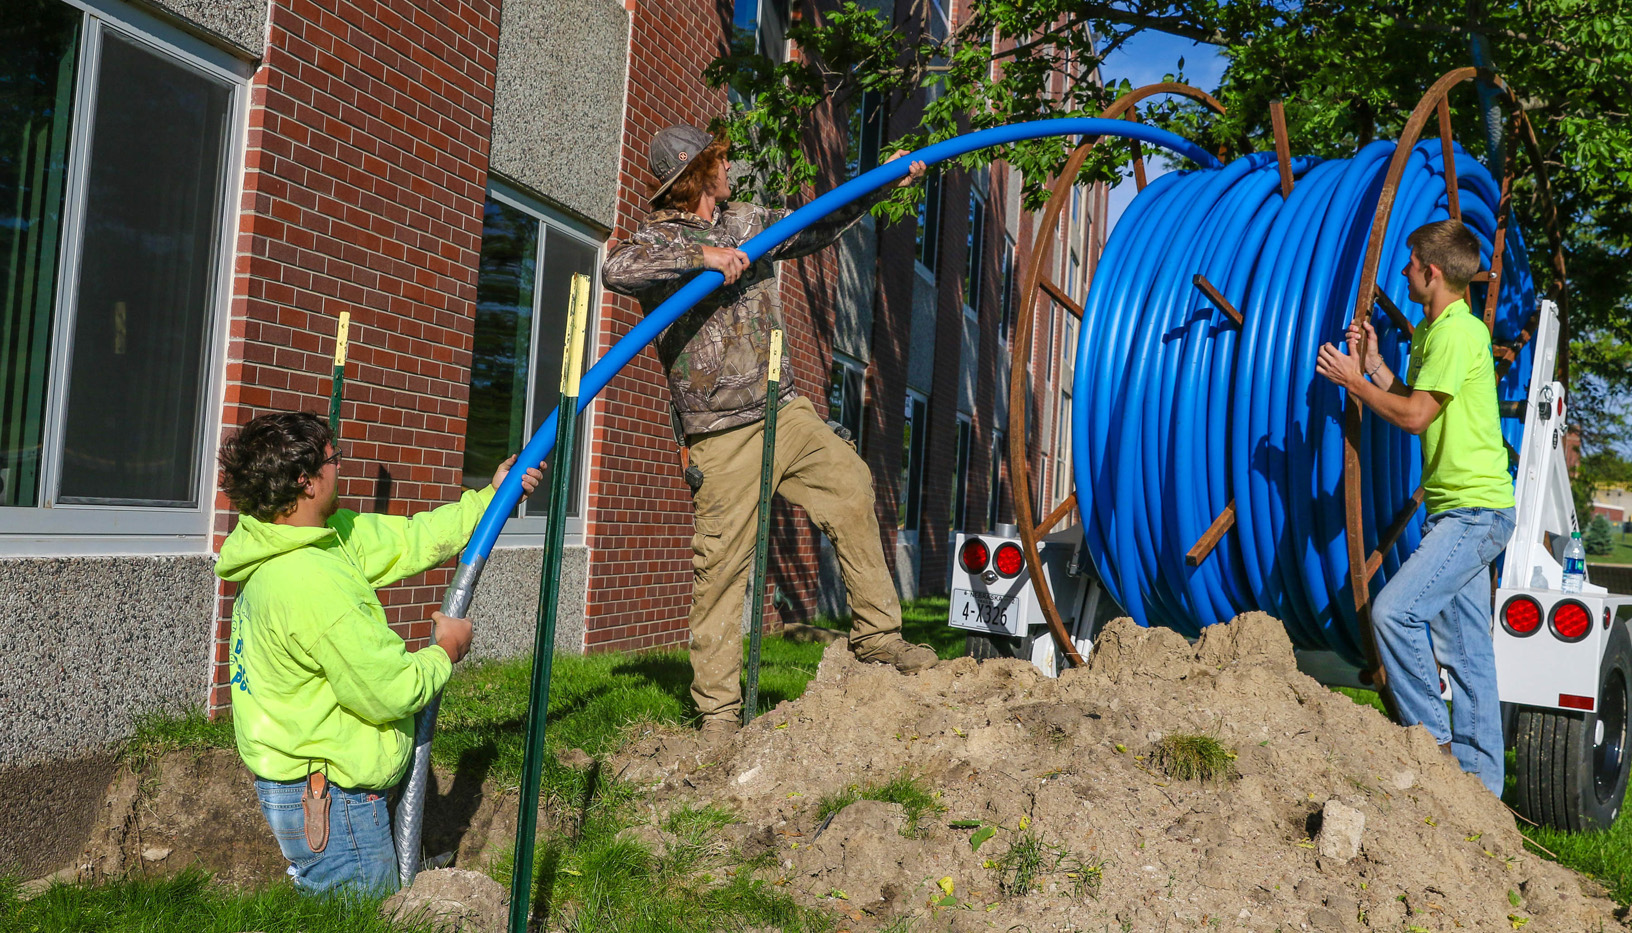 Myers Construction of Broken Bow workers, from left, Jake McCormick, Slade Russell and Collin Hoffman roll out tubing that is part of new fiber optic ring installation that will improve information technology services at UNK. (Photo by Corbey R. Dorsey/UNK Communications)